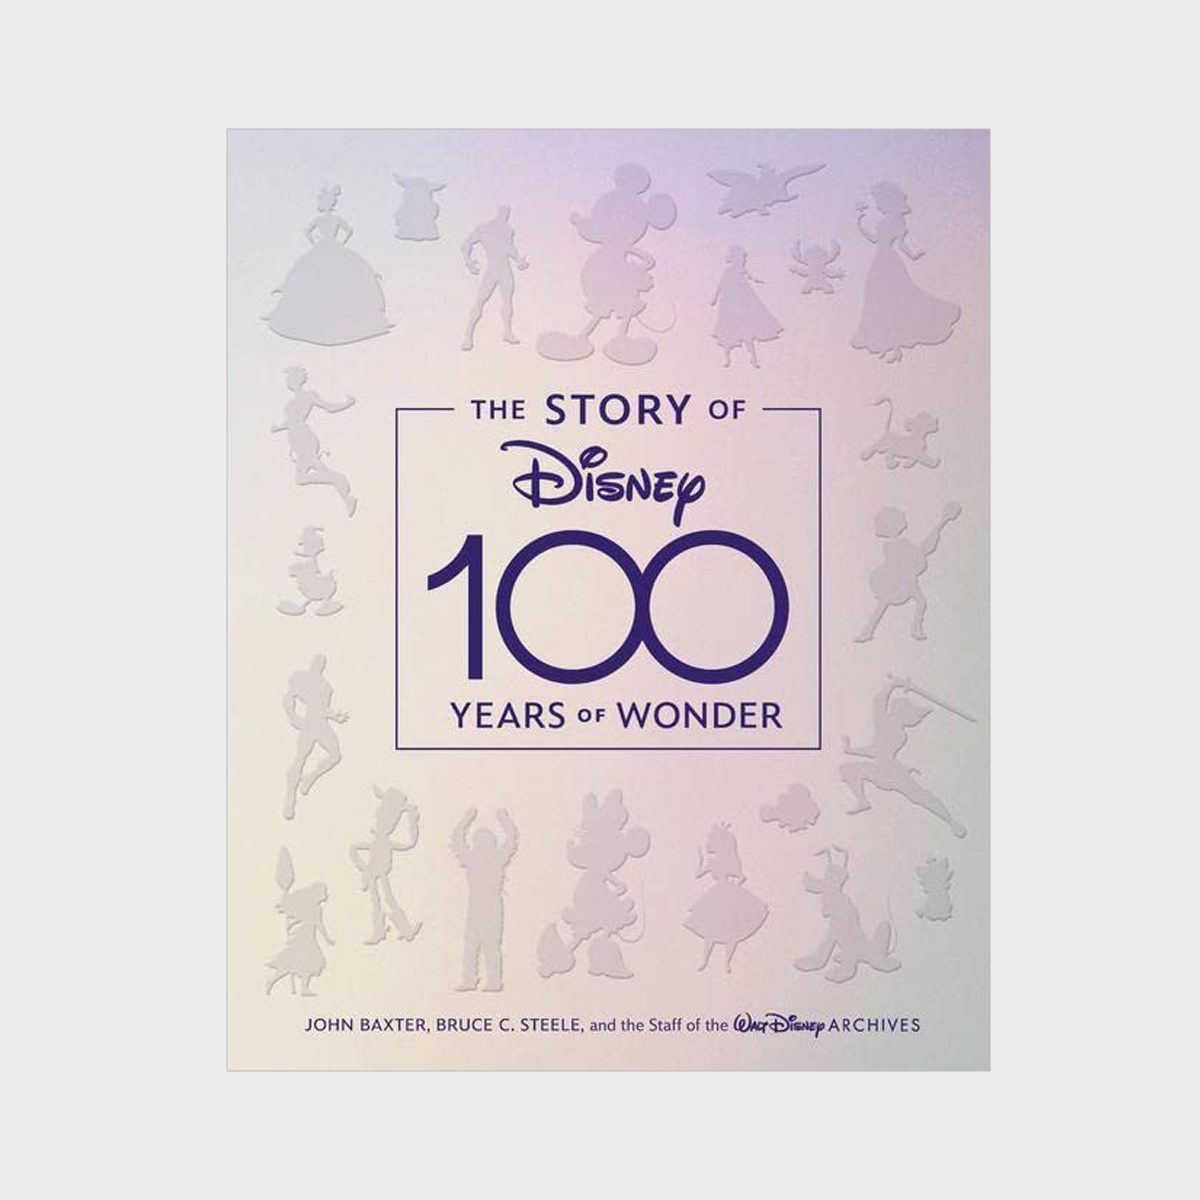 https://www.rd.com/wp-content/uploads/2023/02/The-Story-of-Disney-100-Years-of-Wonder-ecomm-amazon.com_.jpg?fit=700%2C700